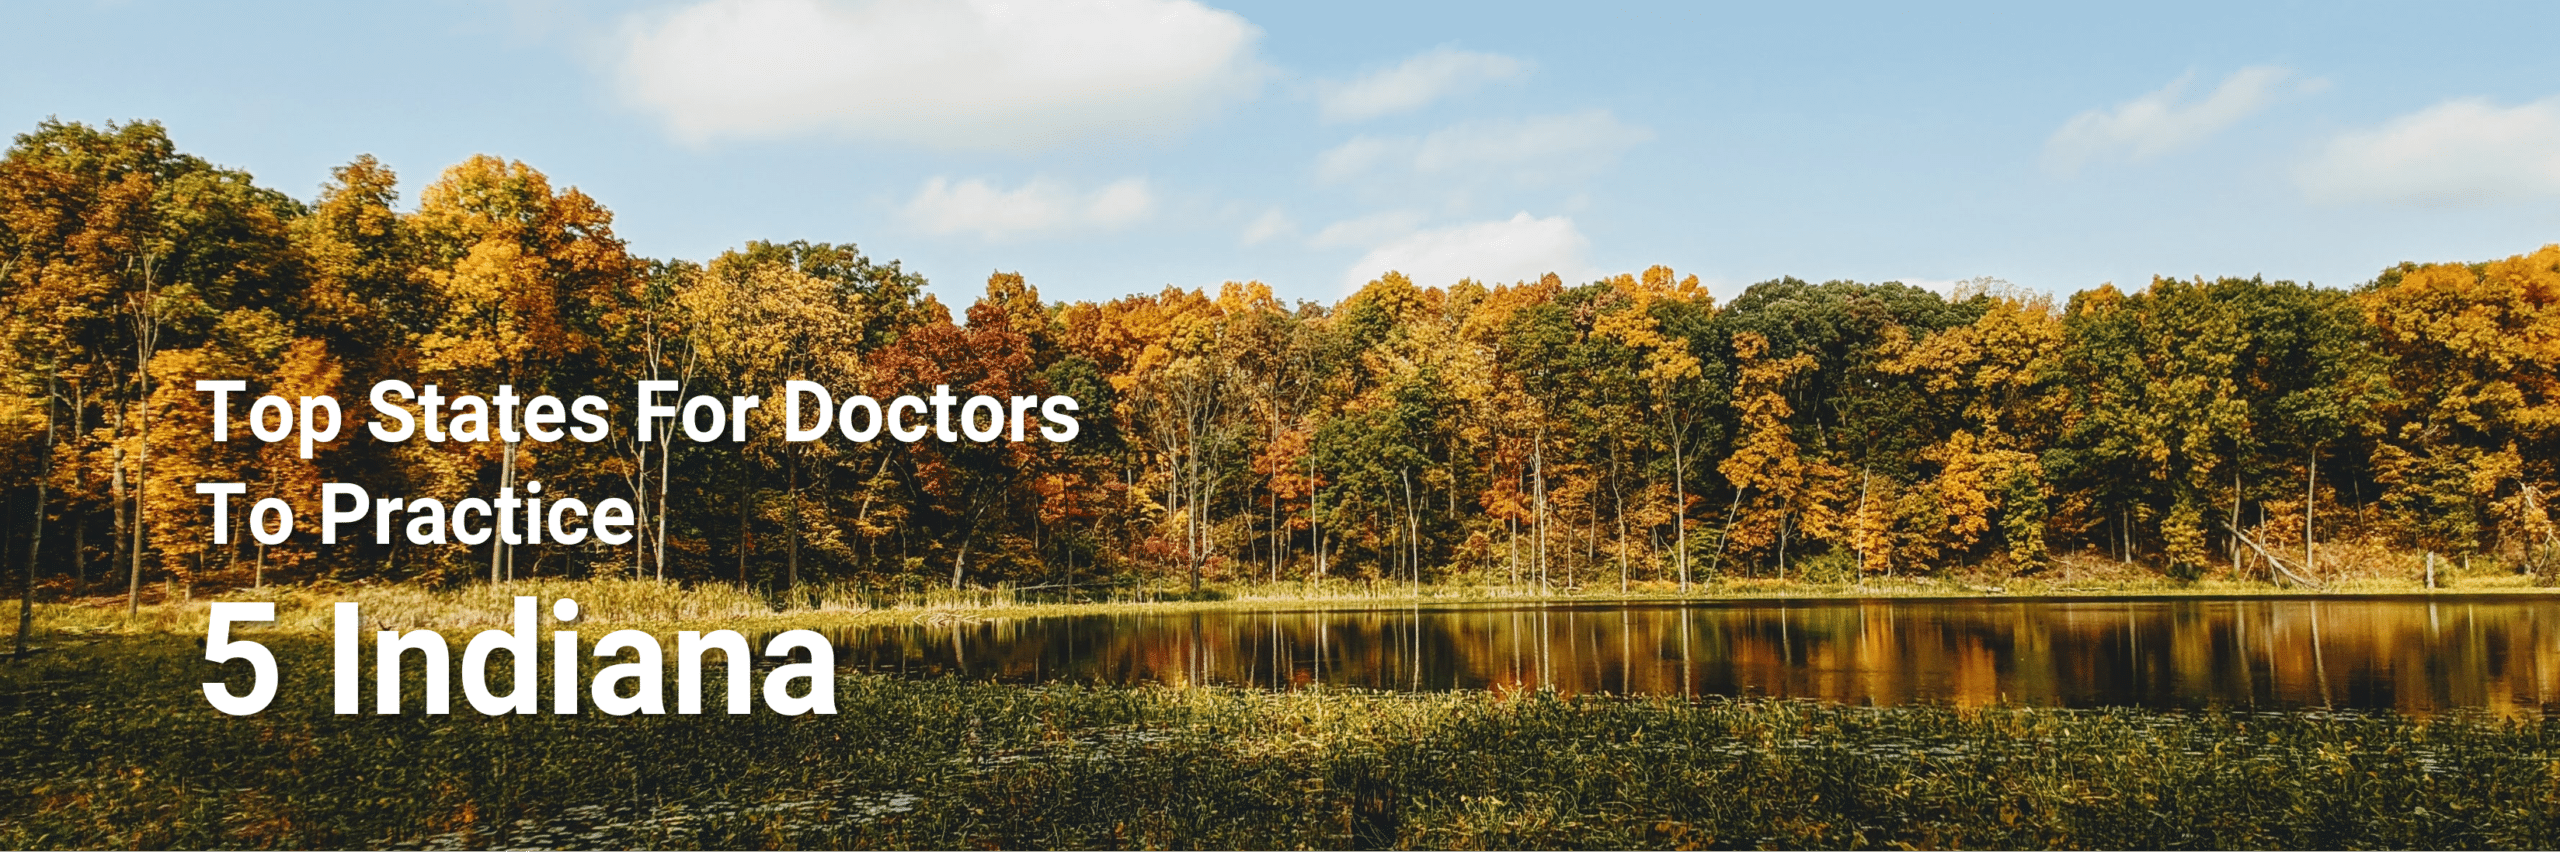 Top States for Doctors to Practice 5 Indiana